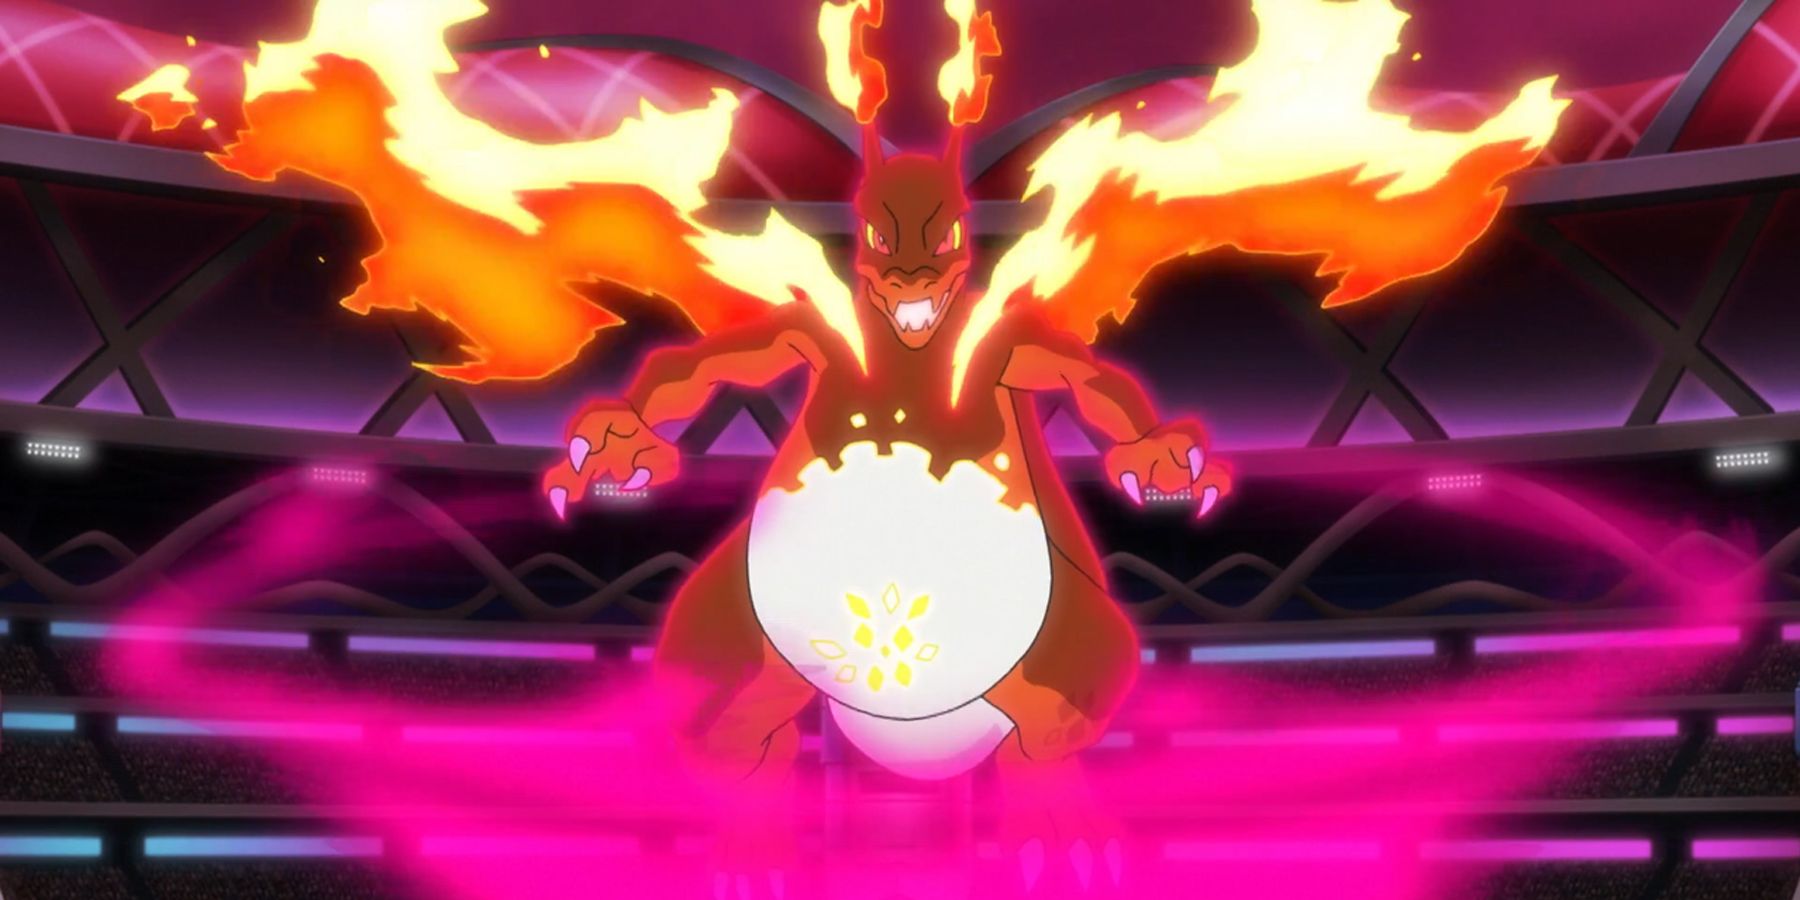 A Gigantamax Charizard from the Pokemon anime.